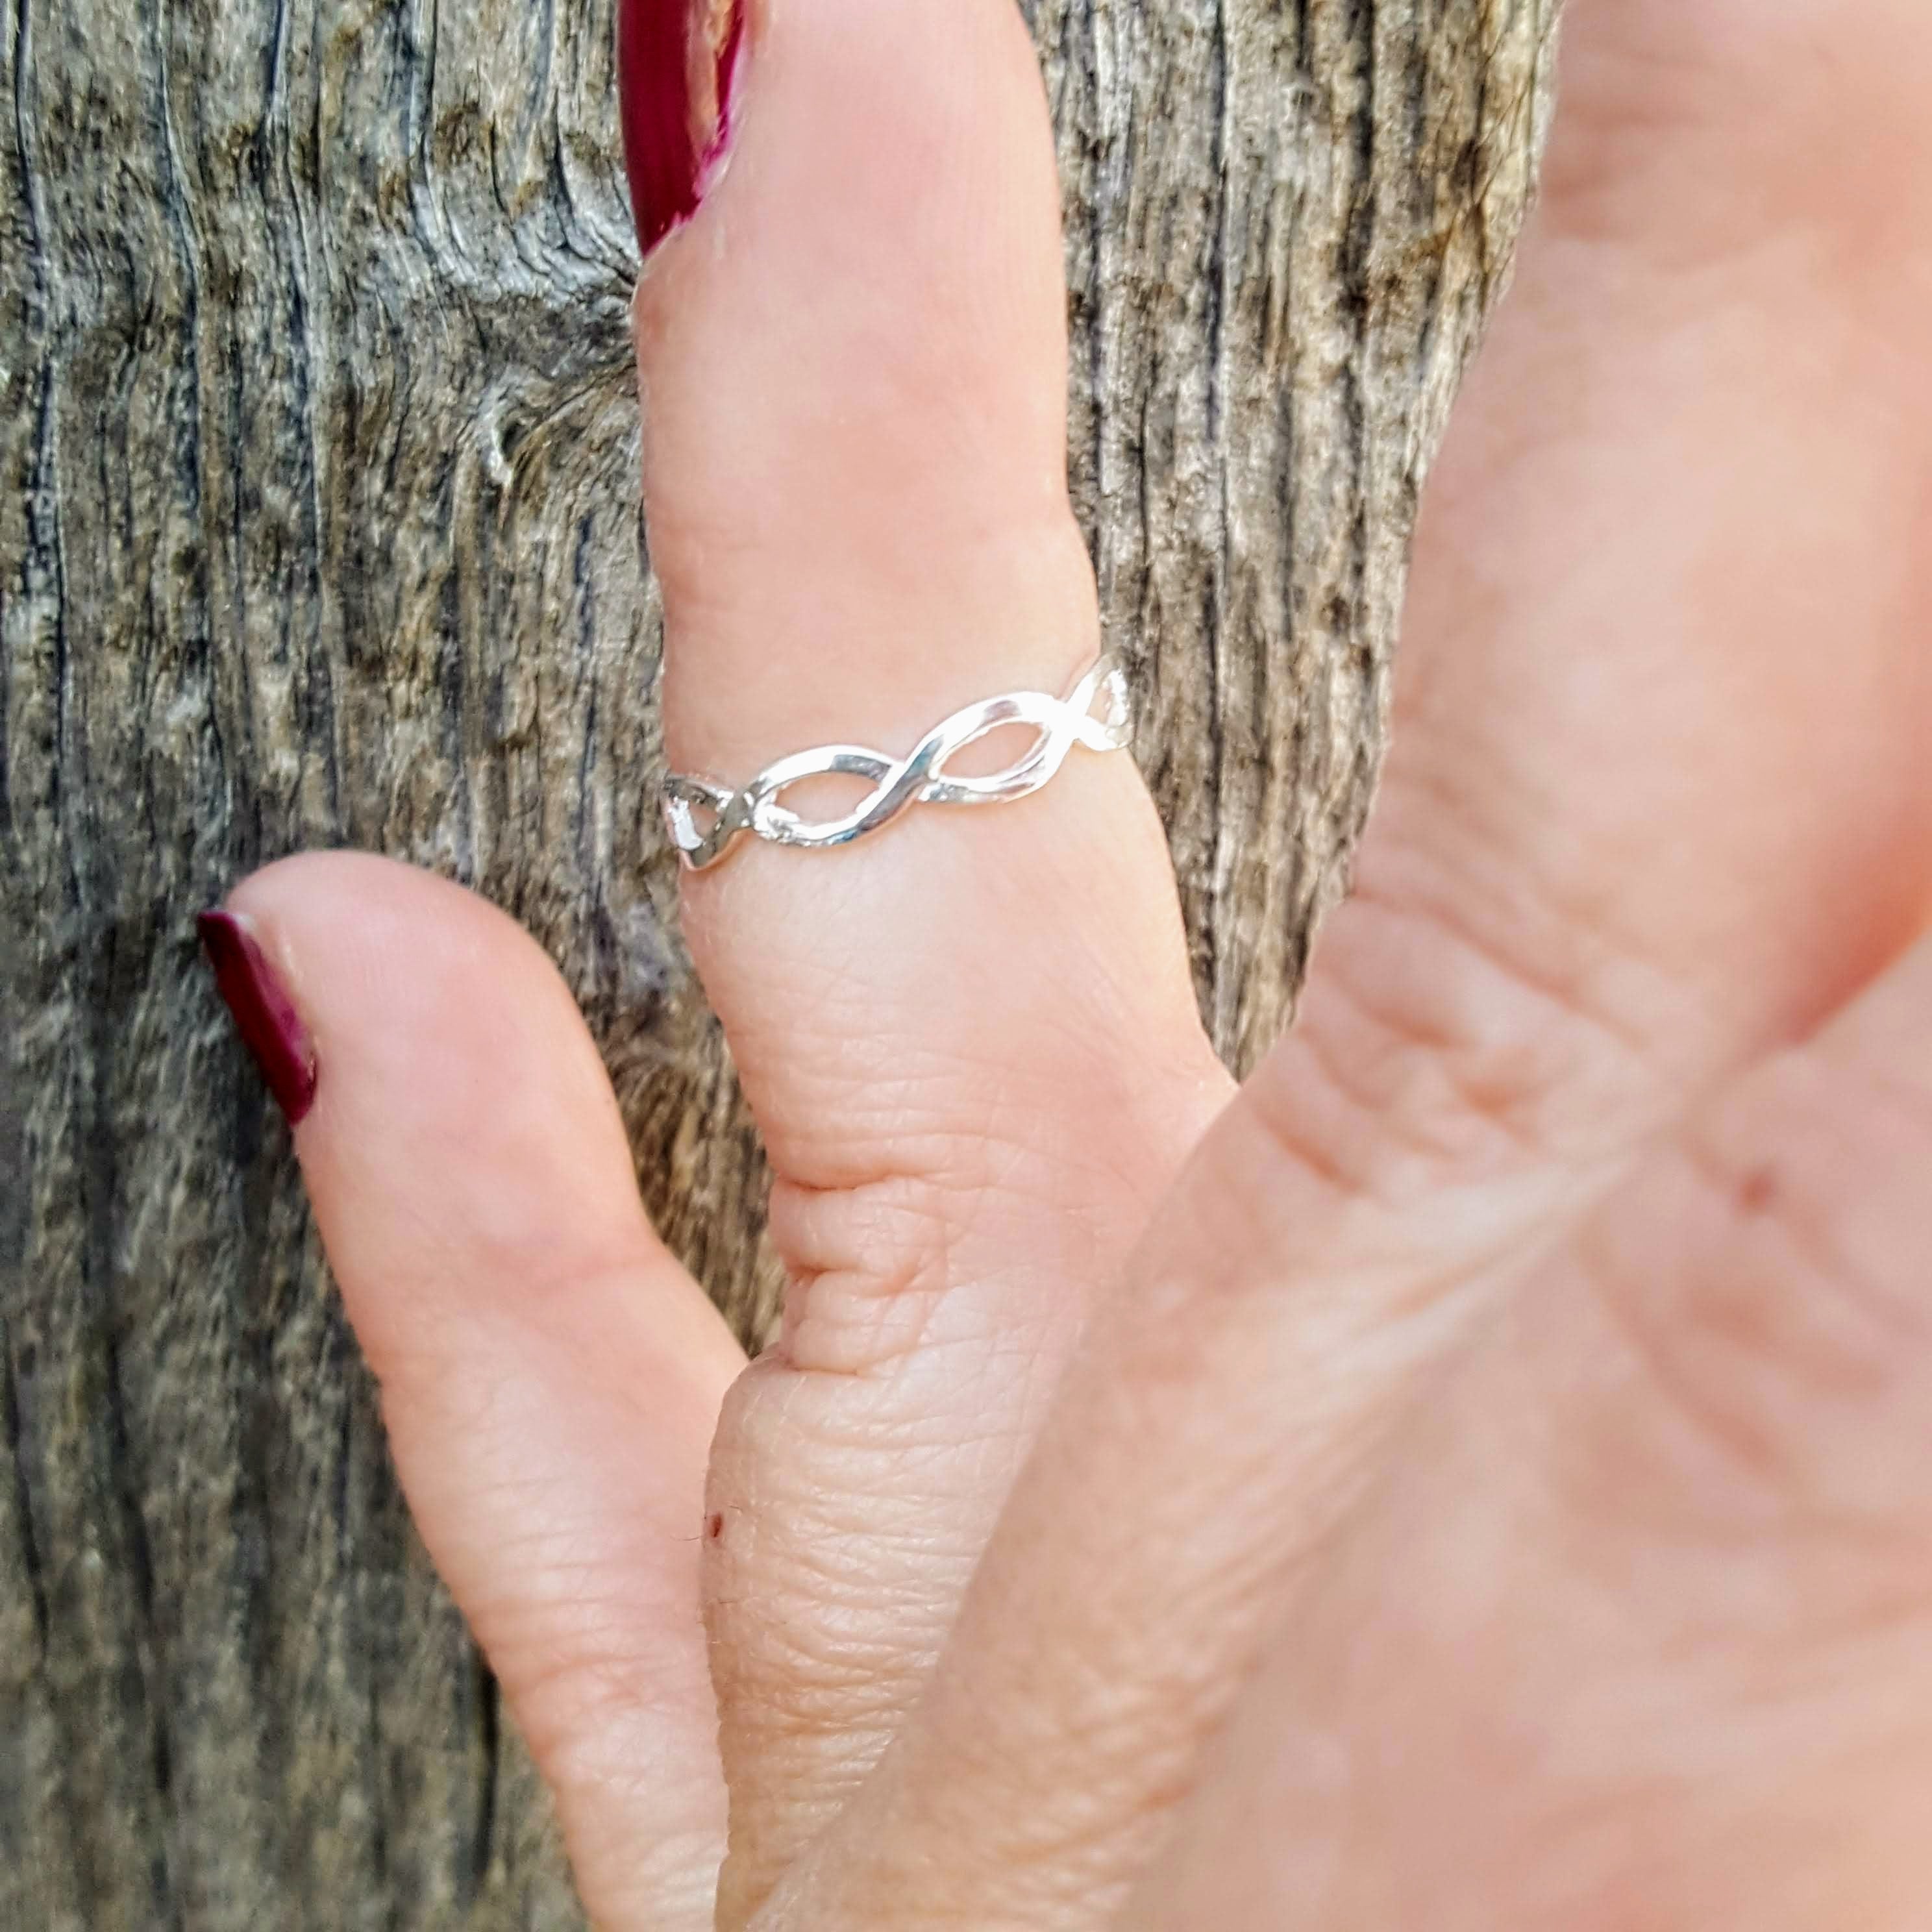 Use this eternity ring as a midi, knuckle, or thumb accessory